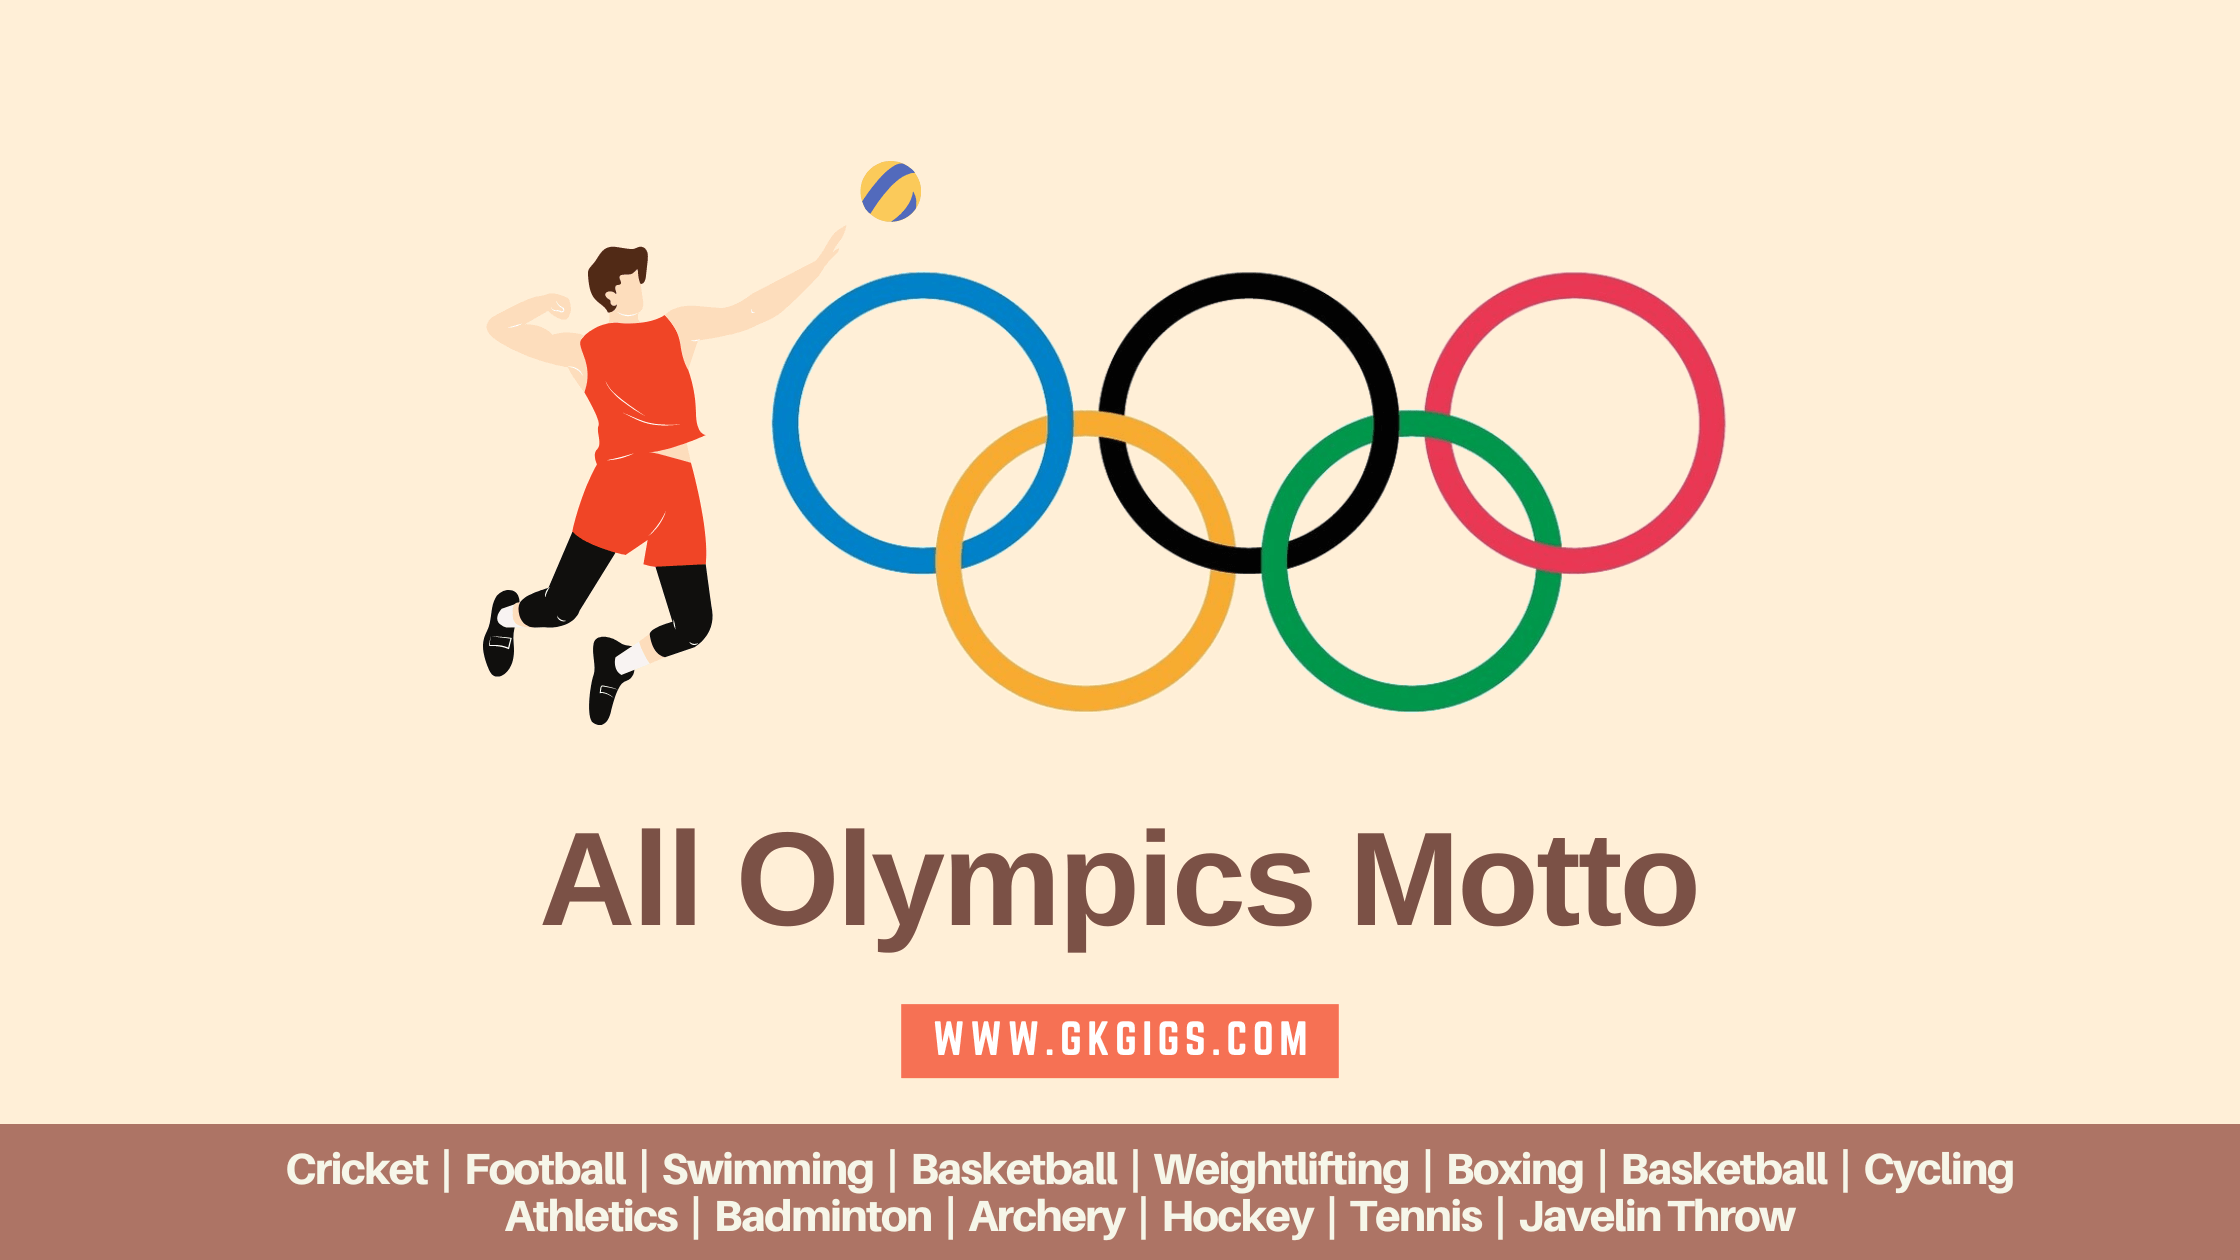 List Of All Olympics Motto From 1896 To 2026 GkGigs